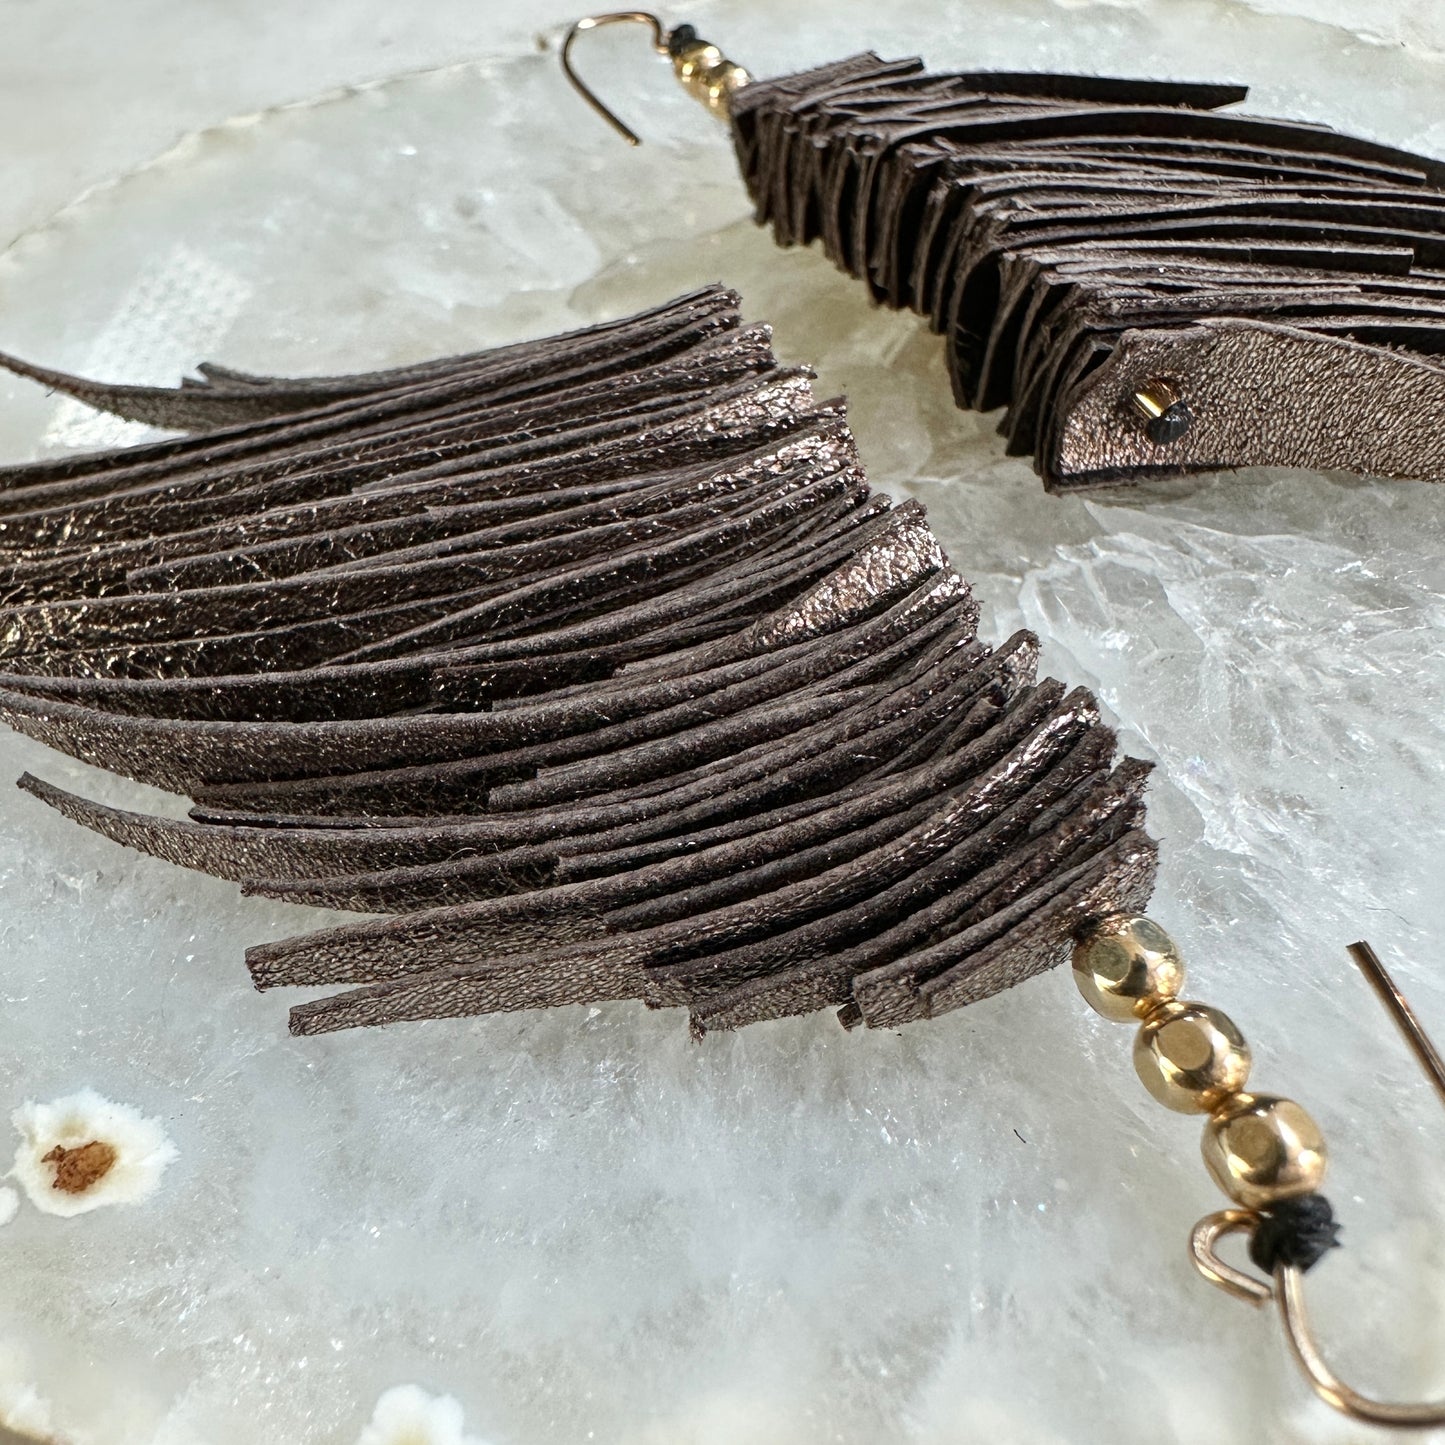 Dark Brown and Pewter Leather Goddess Earrings